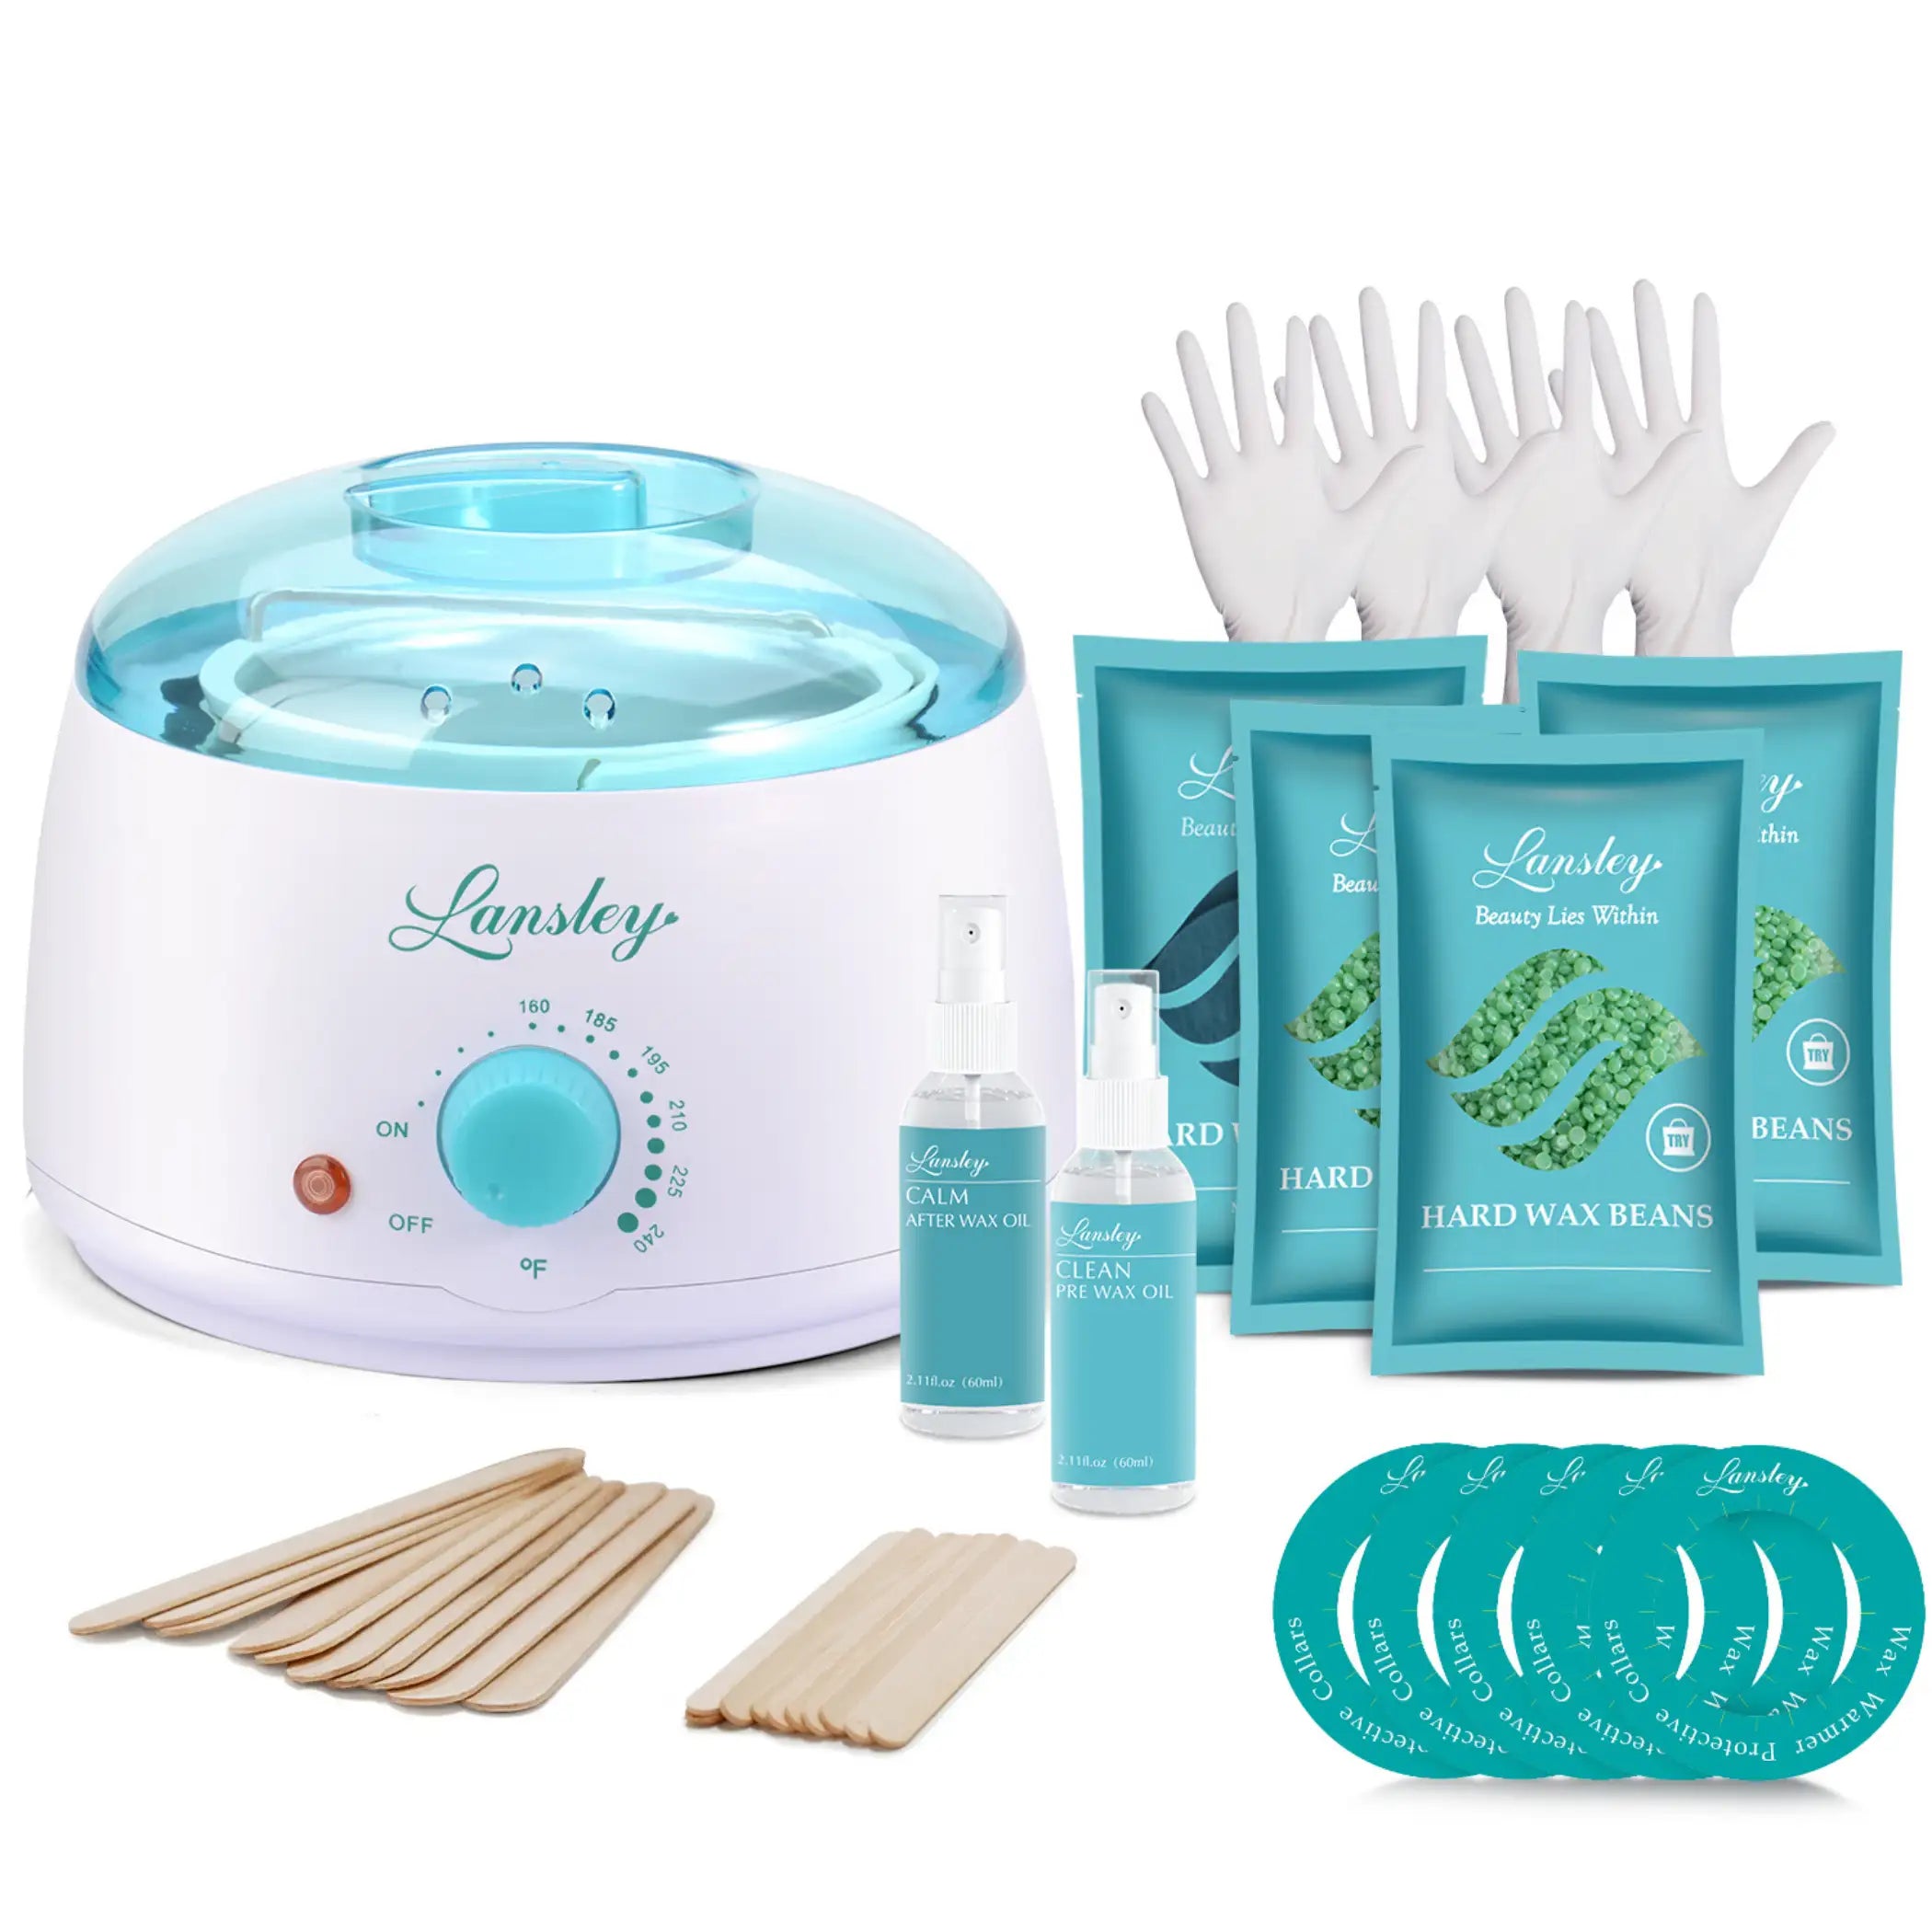 Lansley professional wax hair removal kit that includes 4 bags of stripless  sensitive skin all over body wax